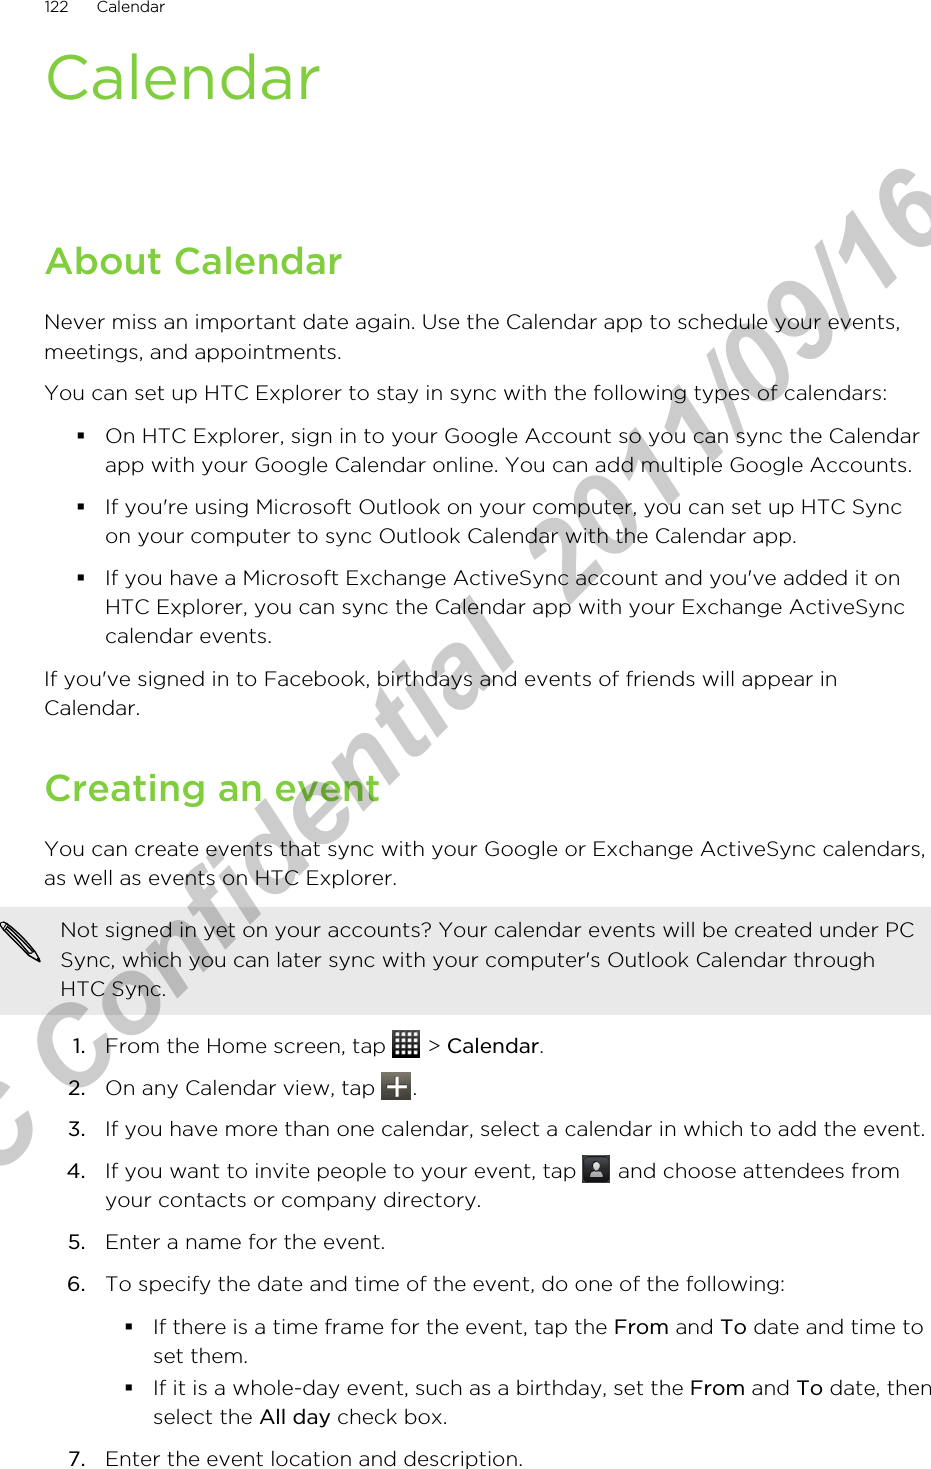 CalendarAbout CalendarNever miss an important date again. Use the Calendar app to schedule your events,meetings, and appointments.You can set up HTC Explorer to stay in sync with the following types of calendars:§On HTC Explorer, sign in to your Google Account so you can sync the Calendarapp with your Google Calendar online. You can add multiple Google Accounts.§If you&apos;re using Microsoft Outlook on your computer, you can set up HTC Syncon your computer to sync Outlook Calendar with the Calendar app.§If you have a Microsoft Exchange ActiveSync account and you&apos;ve added it onHTC Explorer, you can sync the Calendar app with your Exchange ActiveSynccalendar events.If you&apos;ve signed in to Facebook, birthdays and events of friends will appear inCalendar.Creating an eventYou can create events that sync with your Google or Exchange ActiveSync calendars,as well as events on HTC Explorer.Not signed in yet on your accounts? Your calendar events will be created under PCSync, which you can later sync with your computer&apos;s Outlook Calendar throughHTC Sync.1. From the Home screen, tap   &gt; Calendar.2. On any Calendar view, tap  .3. If you have more than one calendar, select a calendar in which to add the event.4. If you want to invite people to your event, tap   and choose attendees fromyour contacts or company directory.5. Enter a name for the event.6. To specify the date and time of the event, do one of the following:§If there is a time frame for the event, tap the From and To date and time toset them.§If it is a whole-day event, such as a birthday, set the From and To date, thenselect the All day check box.7. Enter the event location and description.122 CalendarHTC Confidential  2011/09/16 